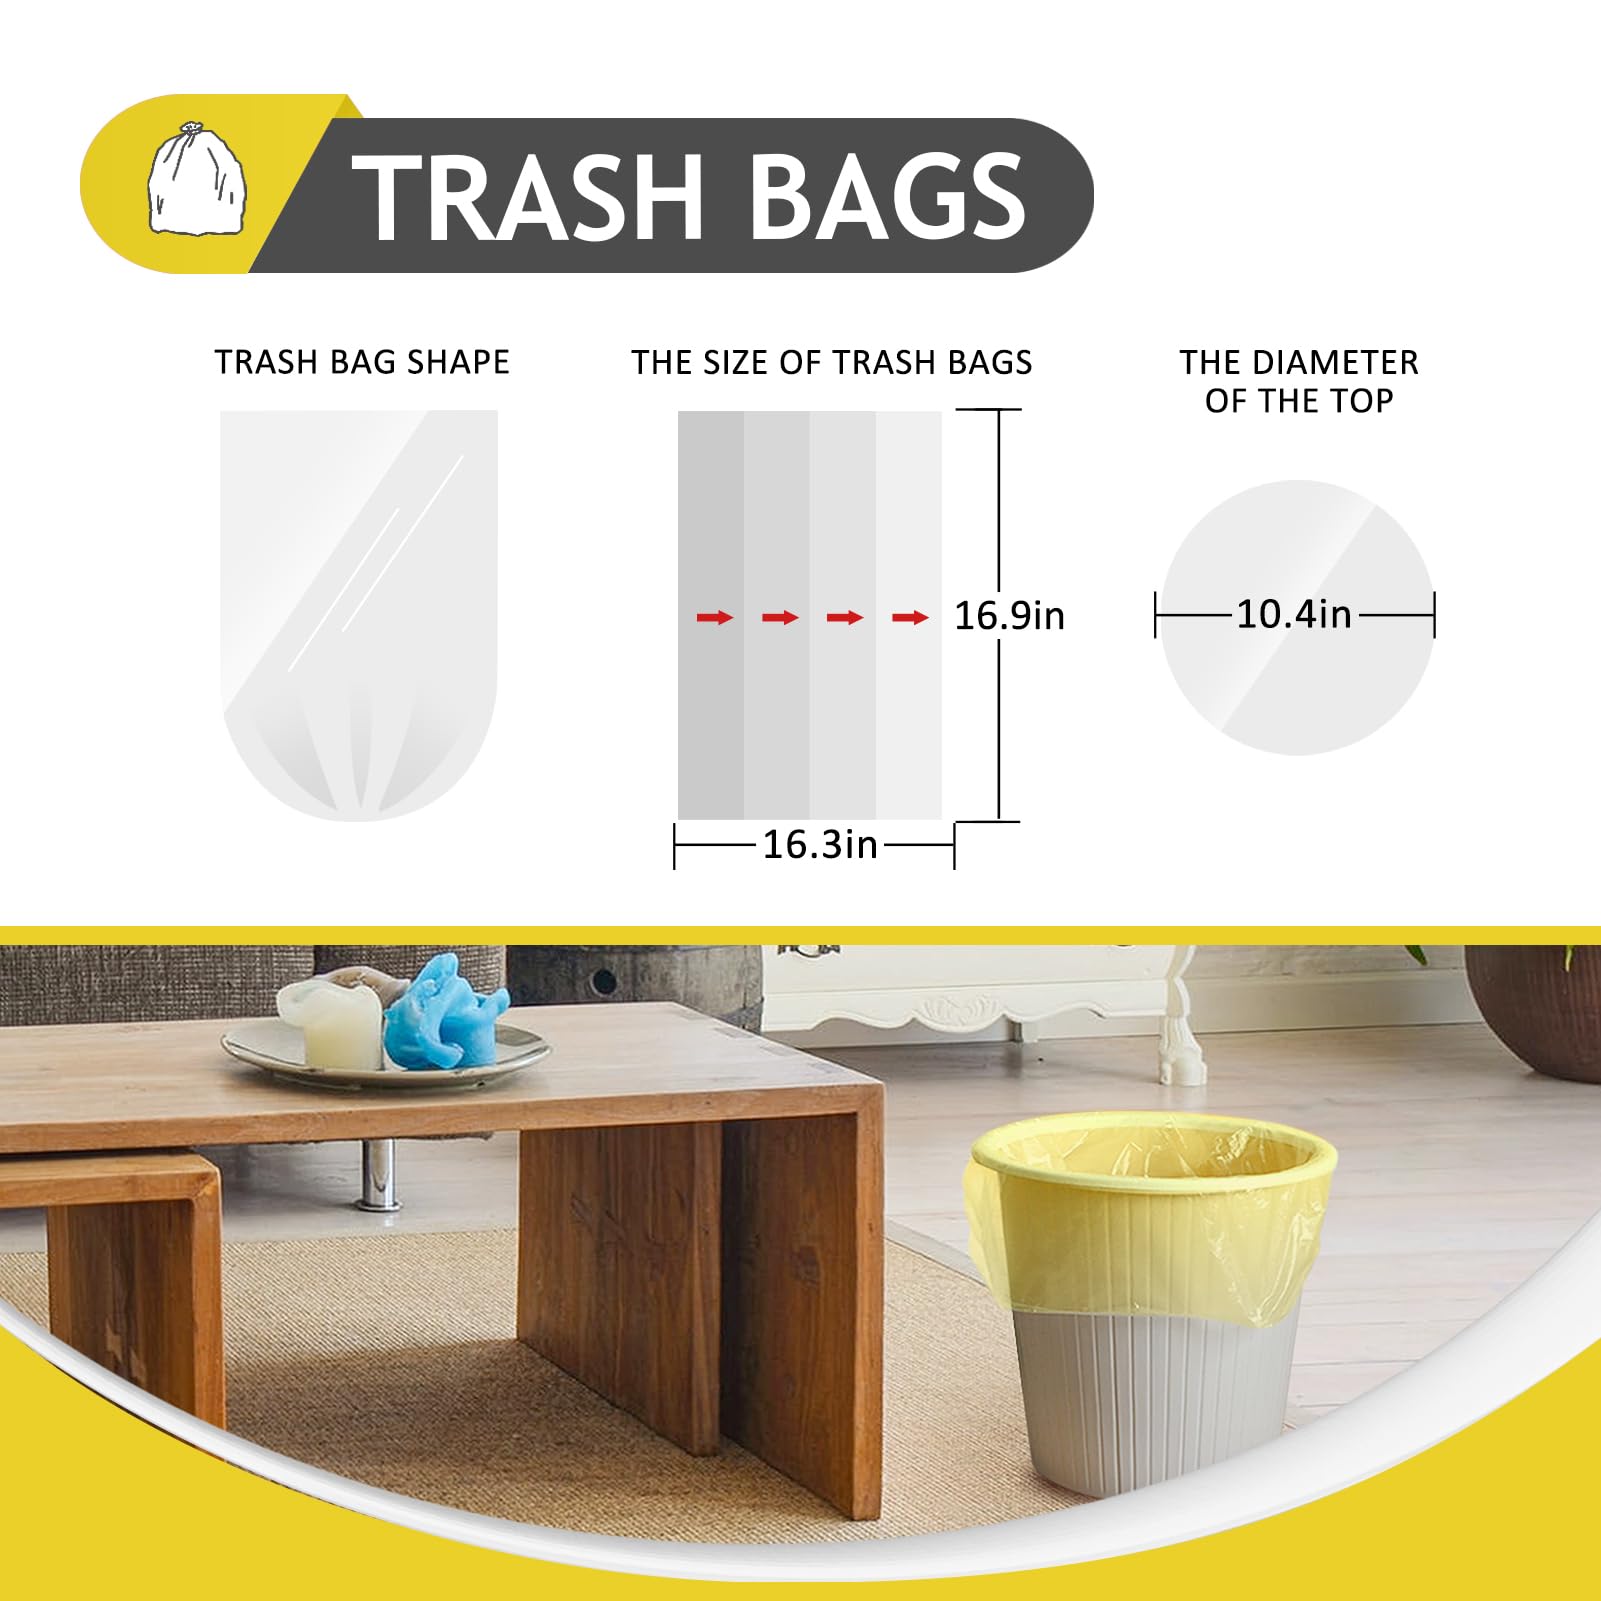 1.2 Gallon 80 Counts Strong Trash Bags Garbage Bags, Bathroom Trash Can ...